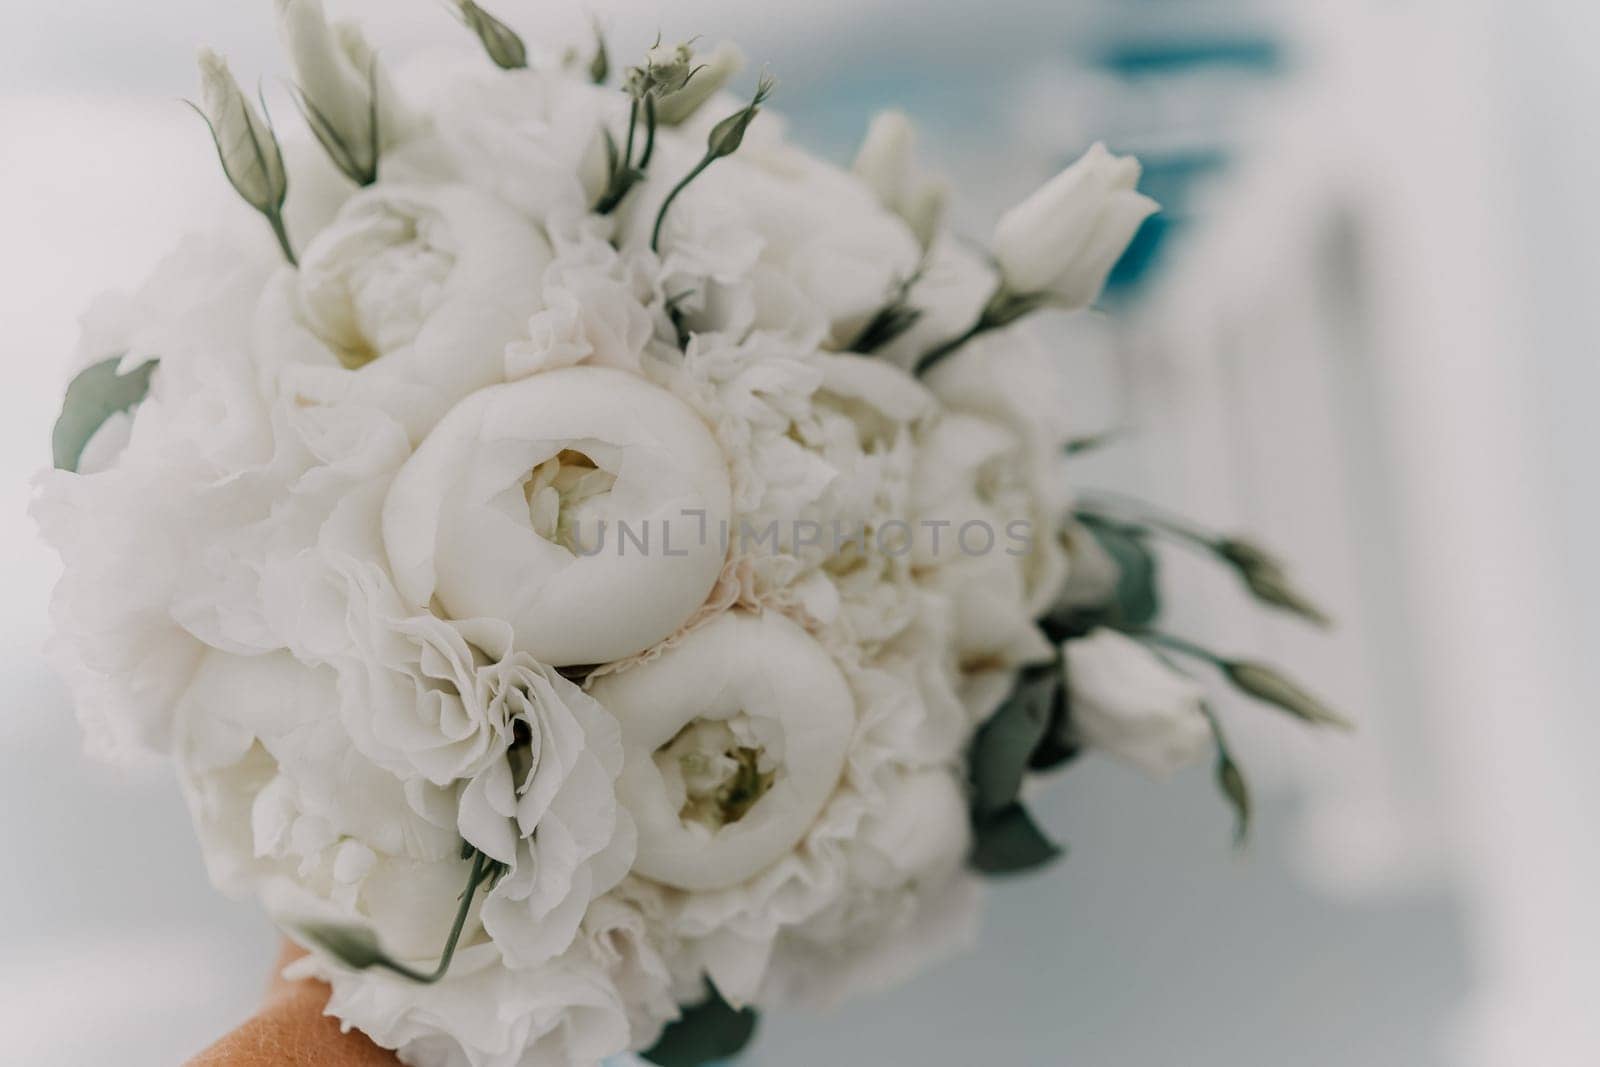 A bouquet of white flowers is being held by a person. The flowers are arranged in a way that they are not too close to each other, giving the impression of a beautiful and elegant arrangement. by Matiunina